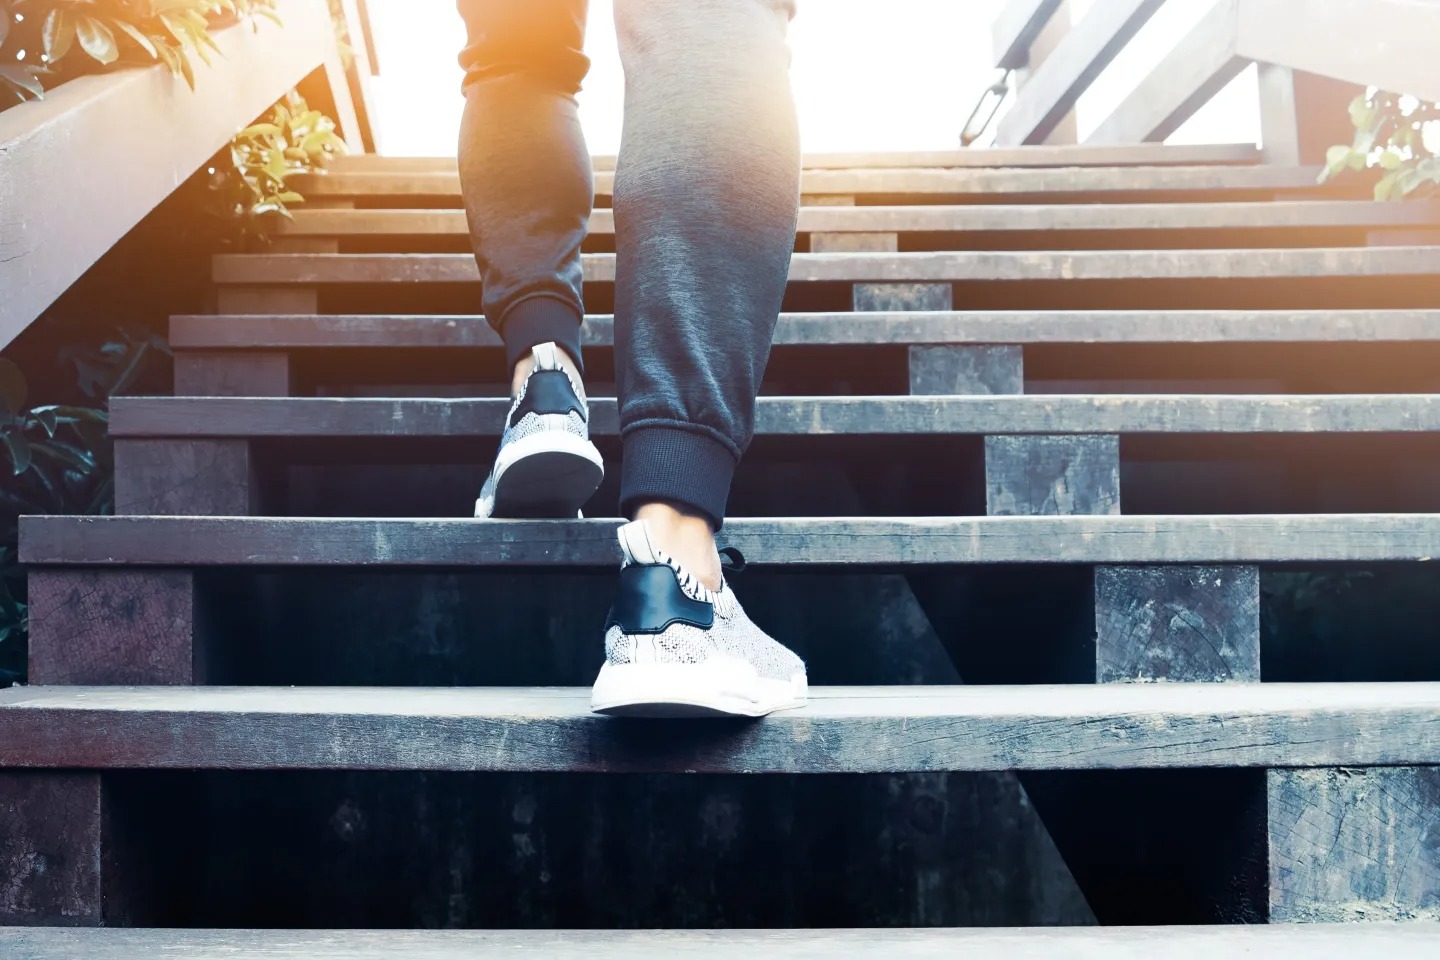 It only requires a few flights of stairs each day, according to scientists, to climb stairs and extend your existence. Climbing stairs could help you live longer—and experts say it only takes a few flights a day